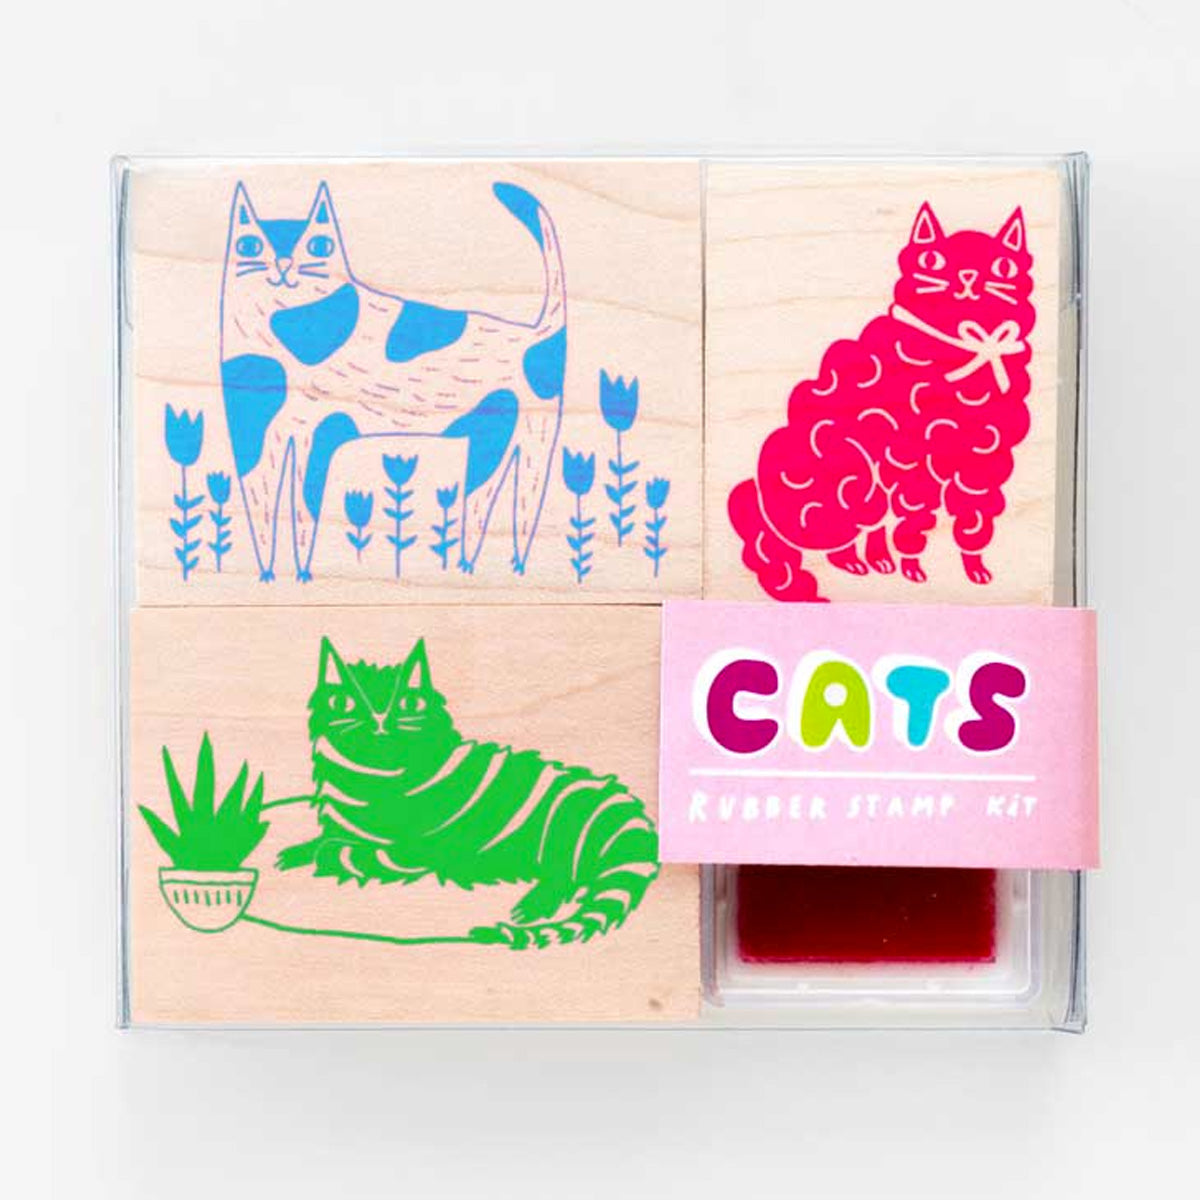 Three different rubber stamp images of cats with a neon pink ink pad